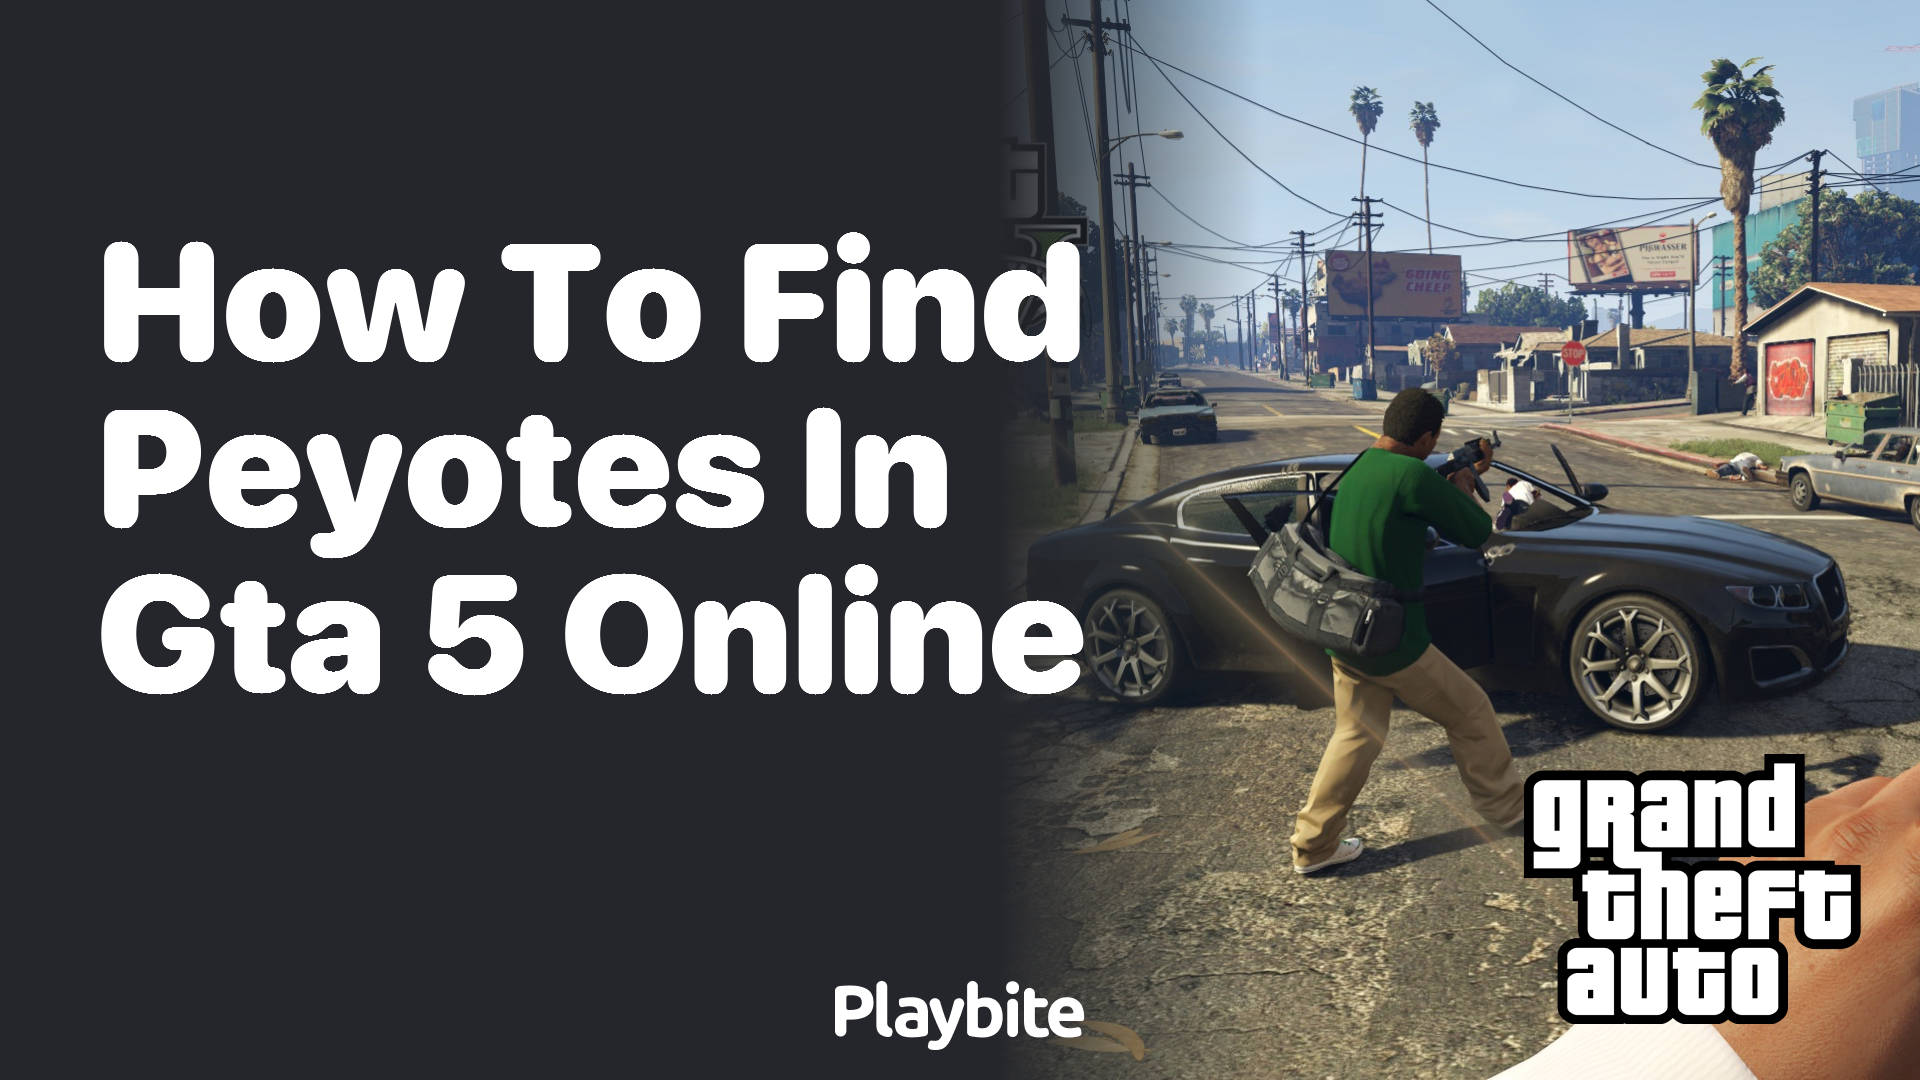 How to Find Peyotes in GTA 5 Online